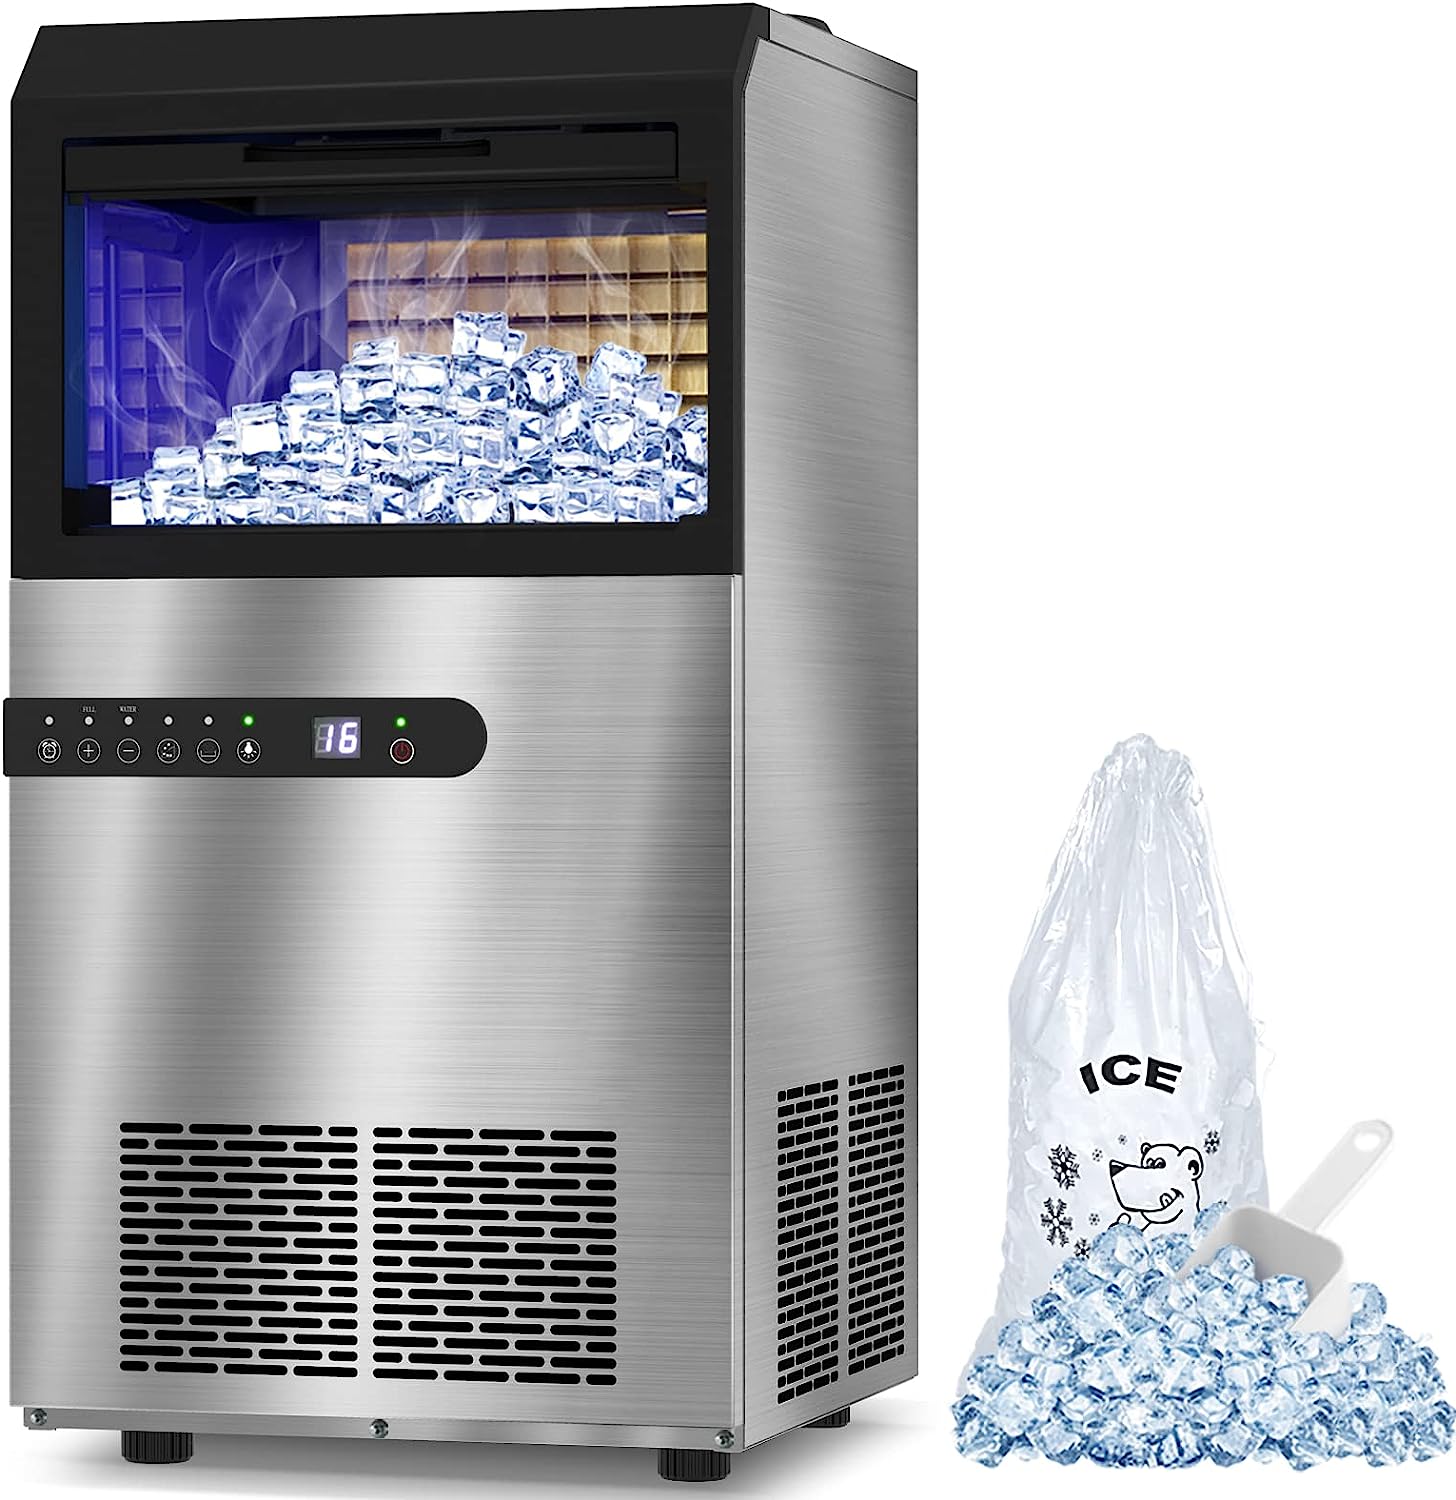 LifePlus Commercial Ice Maker Machine 100Lbs/24H, [...]